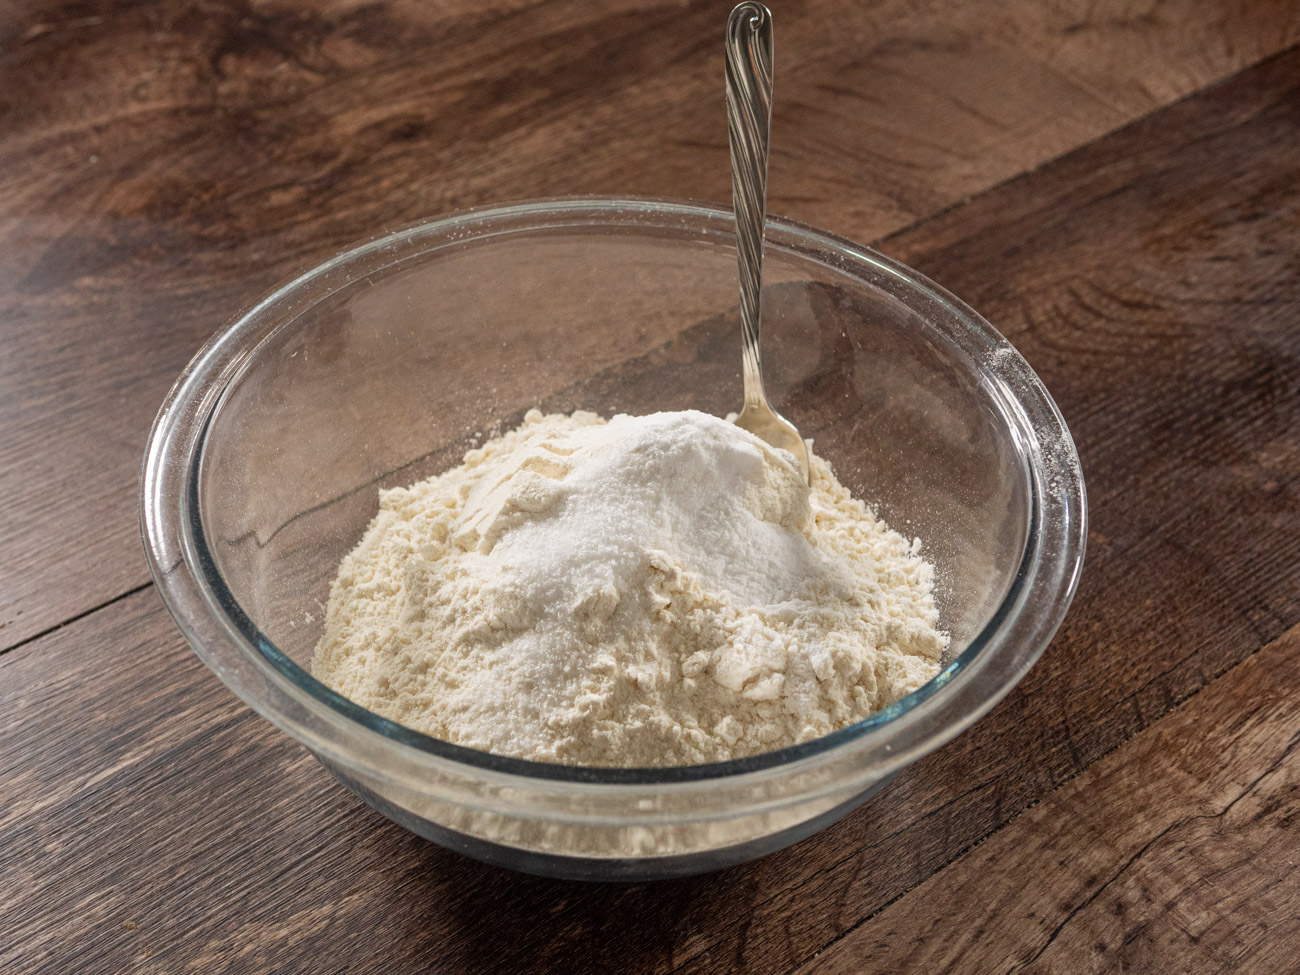 In a medium bowl, combine flour, baking soda, and salt together. In a separate bowl, beat egg, sugar, cream cheese, and vanilla until smooth.